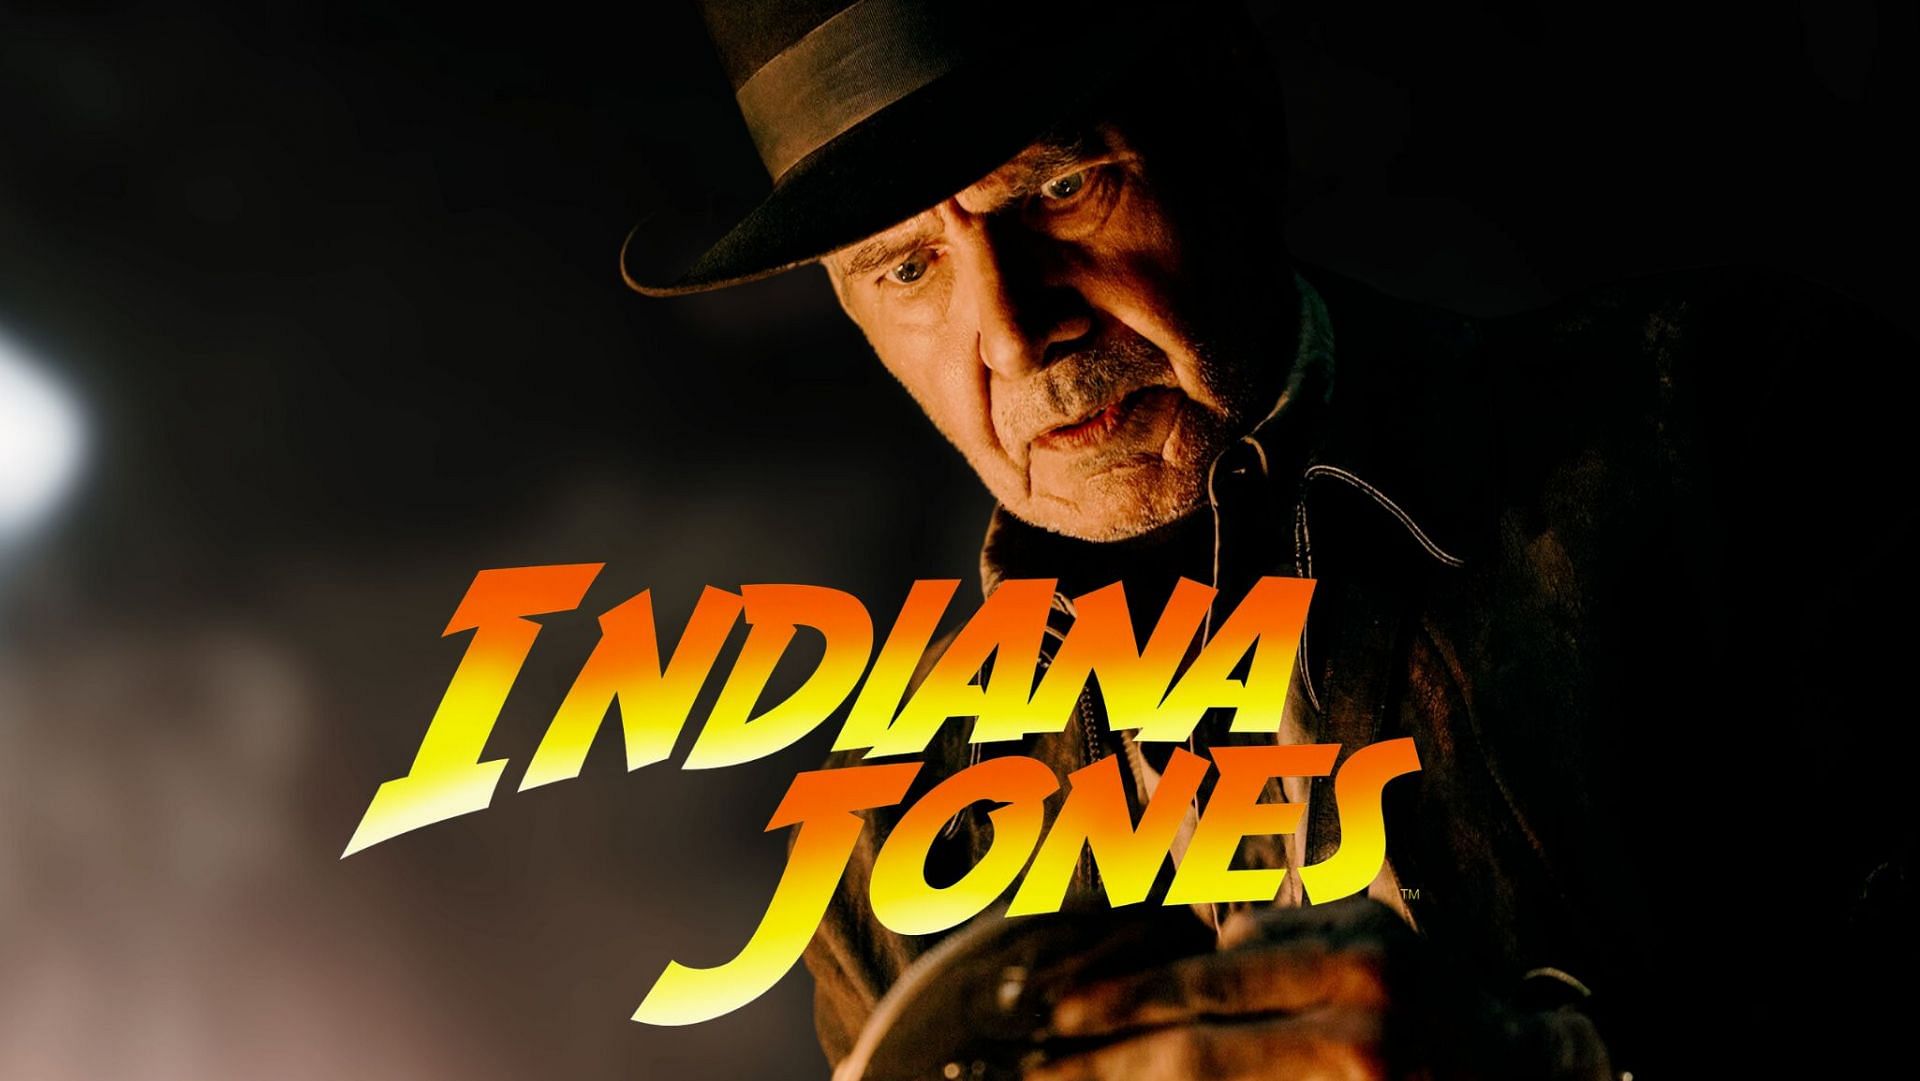 Will the iconic Indiana Jones franchise continue after the fifth film? Lucasfilm President Kathleen Kennedy drops hints (Image via Sportskeeda)